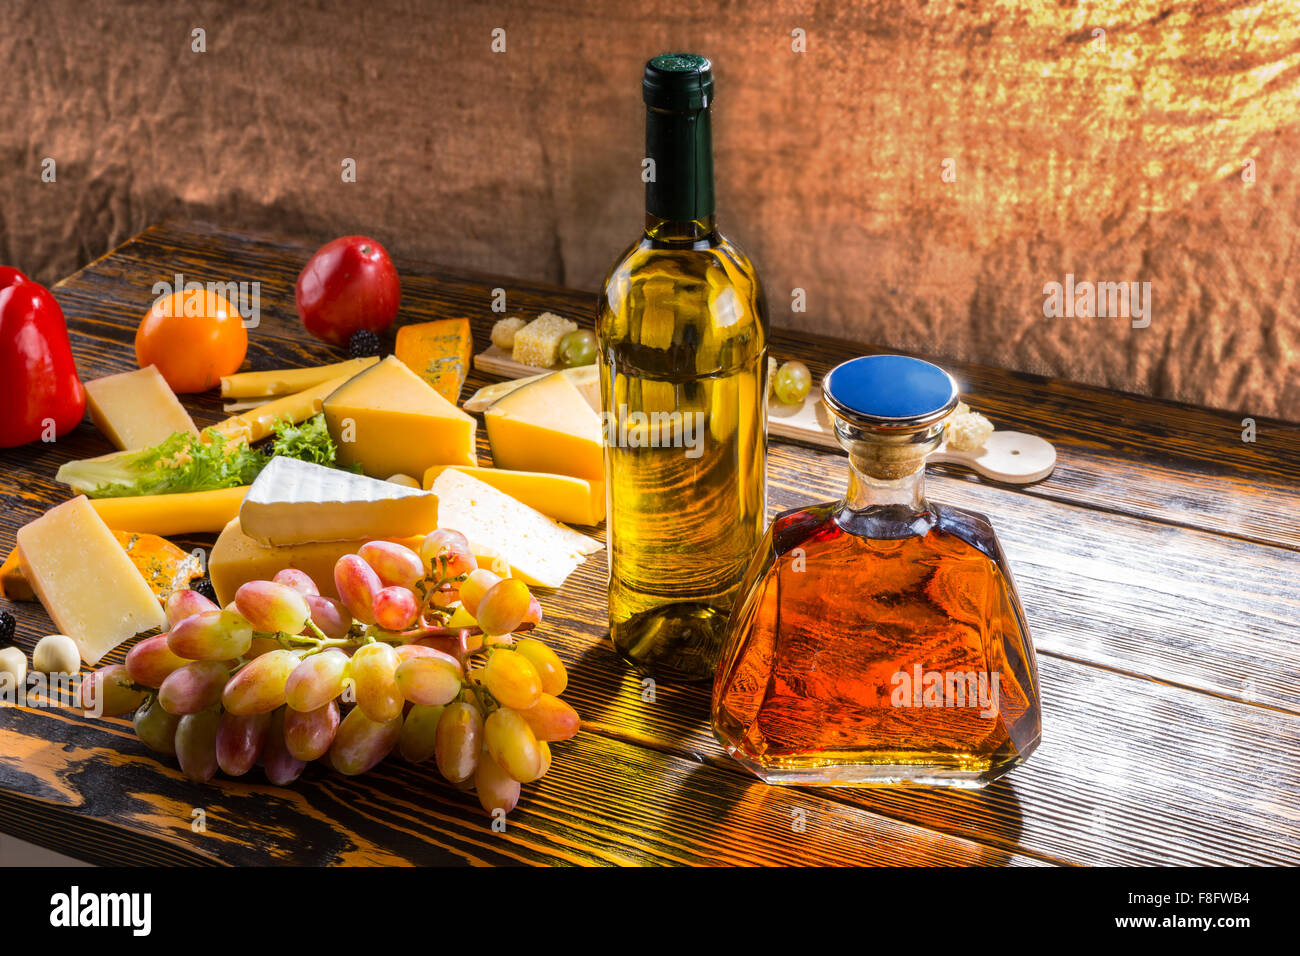 Appetizers at a party with a large assortment of speciality cheeses, fresh grapes, bottle of wine and whiskey decanter on a wooden table. Stock Photo